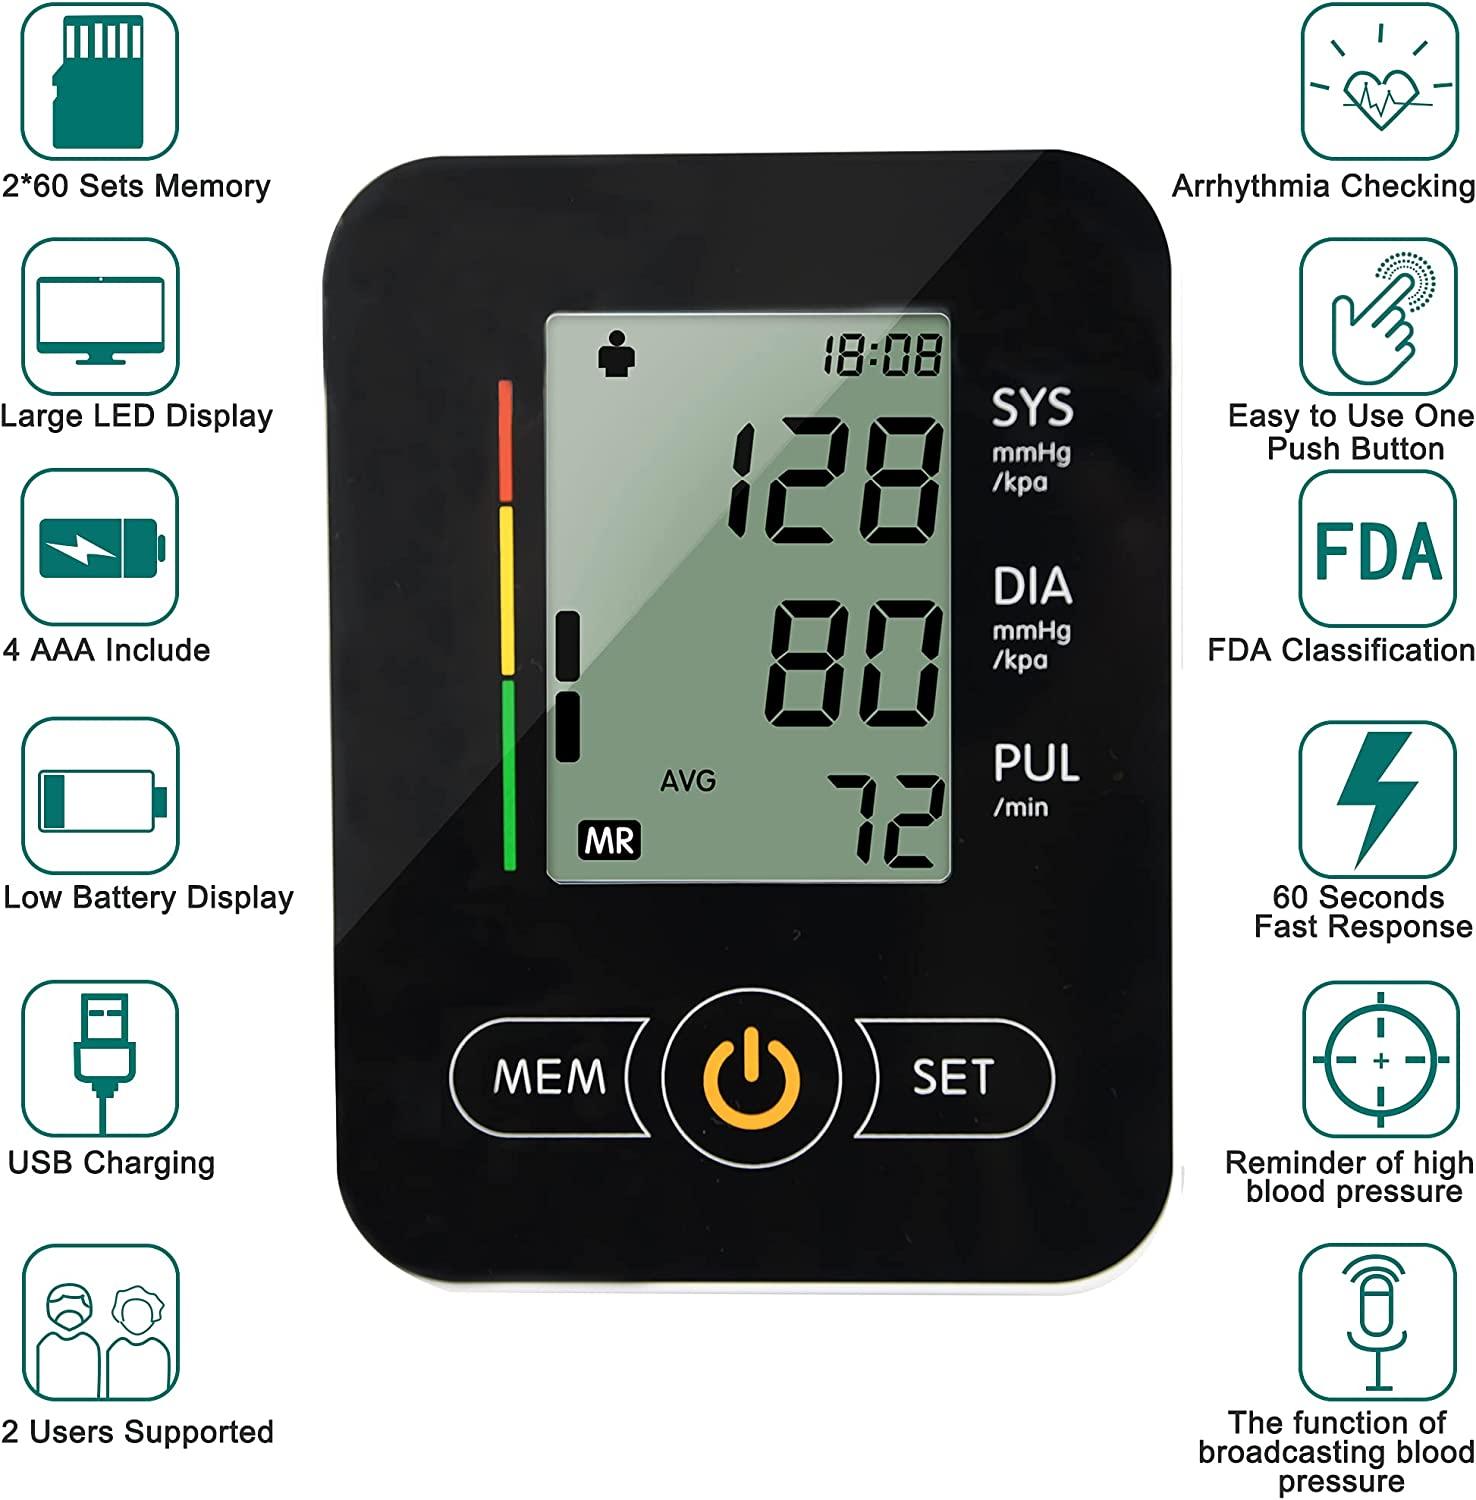 Automatic Arm Blood Pressure Monitors-maguja Automatic Digital Upper Arm Blood  Pressure Monitor Arm Machine, Wide Range of Bandwidth, Large Cuff, Large  LCD Display BP Monitor, Suitable for Home Use Black